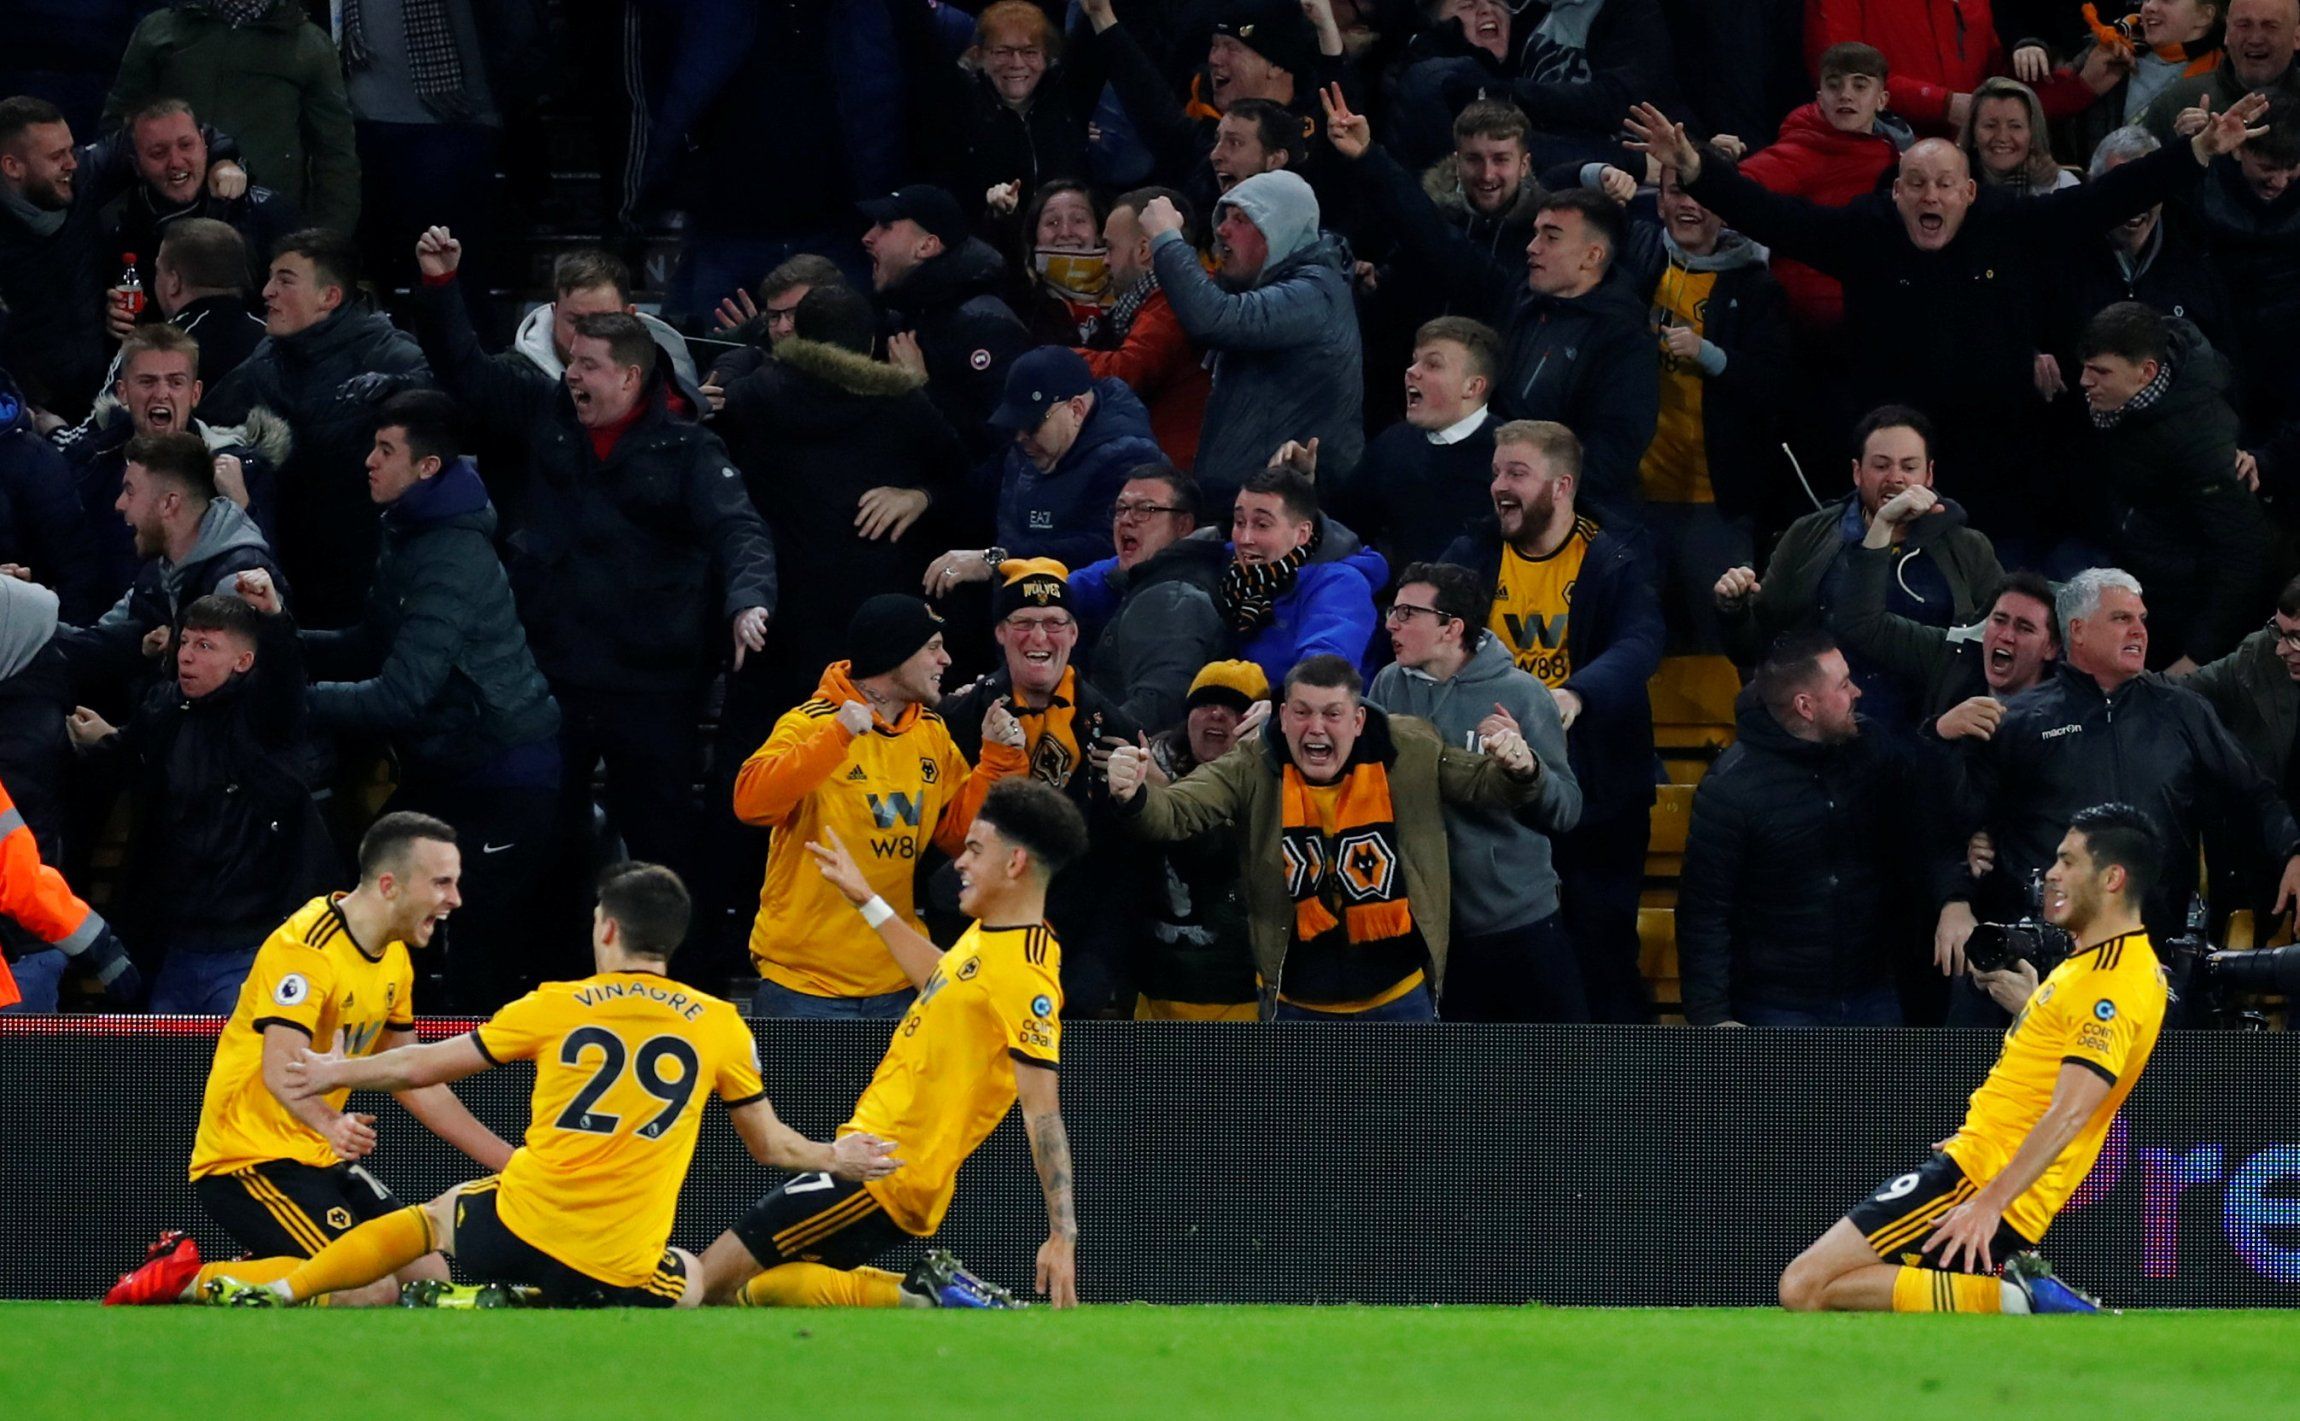 Wolverhampton Wanderers' fans and Diogo Jota celebrates scoring their second goal v Chelsea